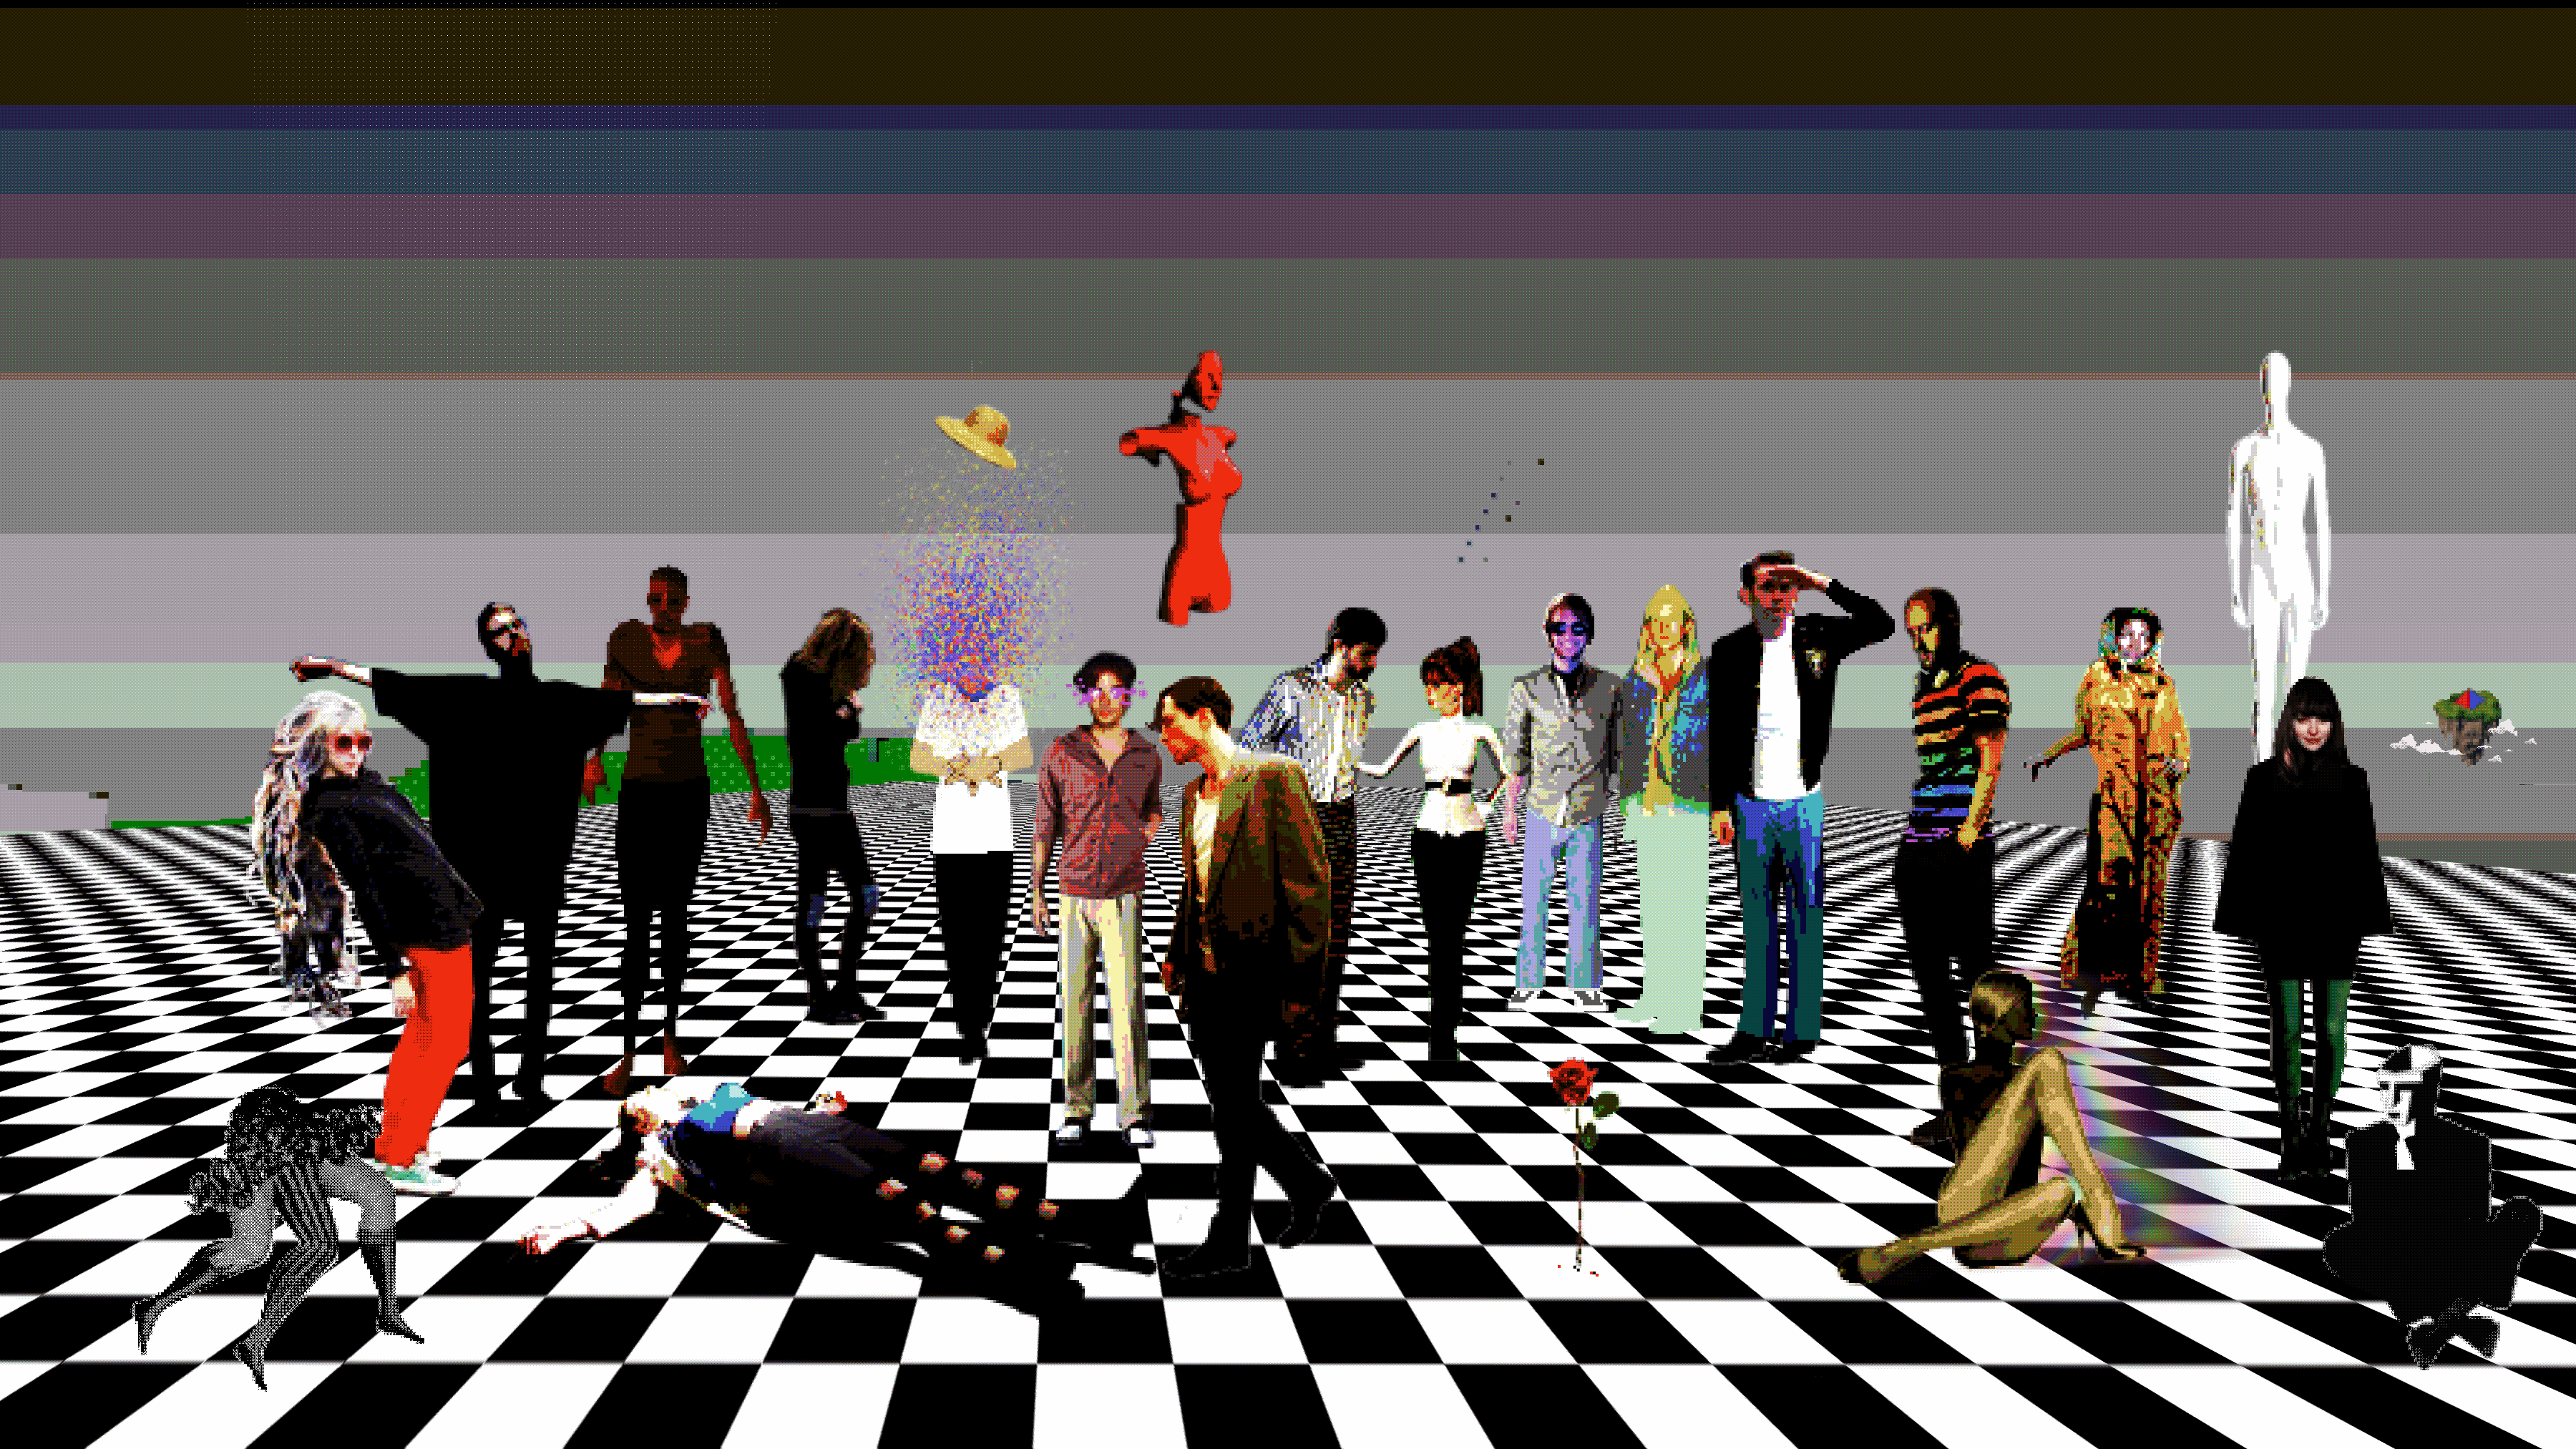 An animated gif of a group of pixelated people standing on a black and white checkerboard. The image is flickering slightly.